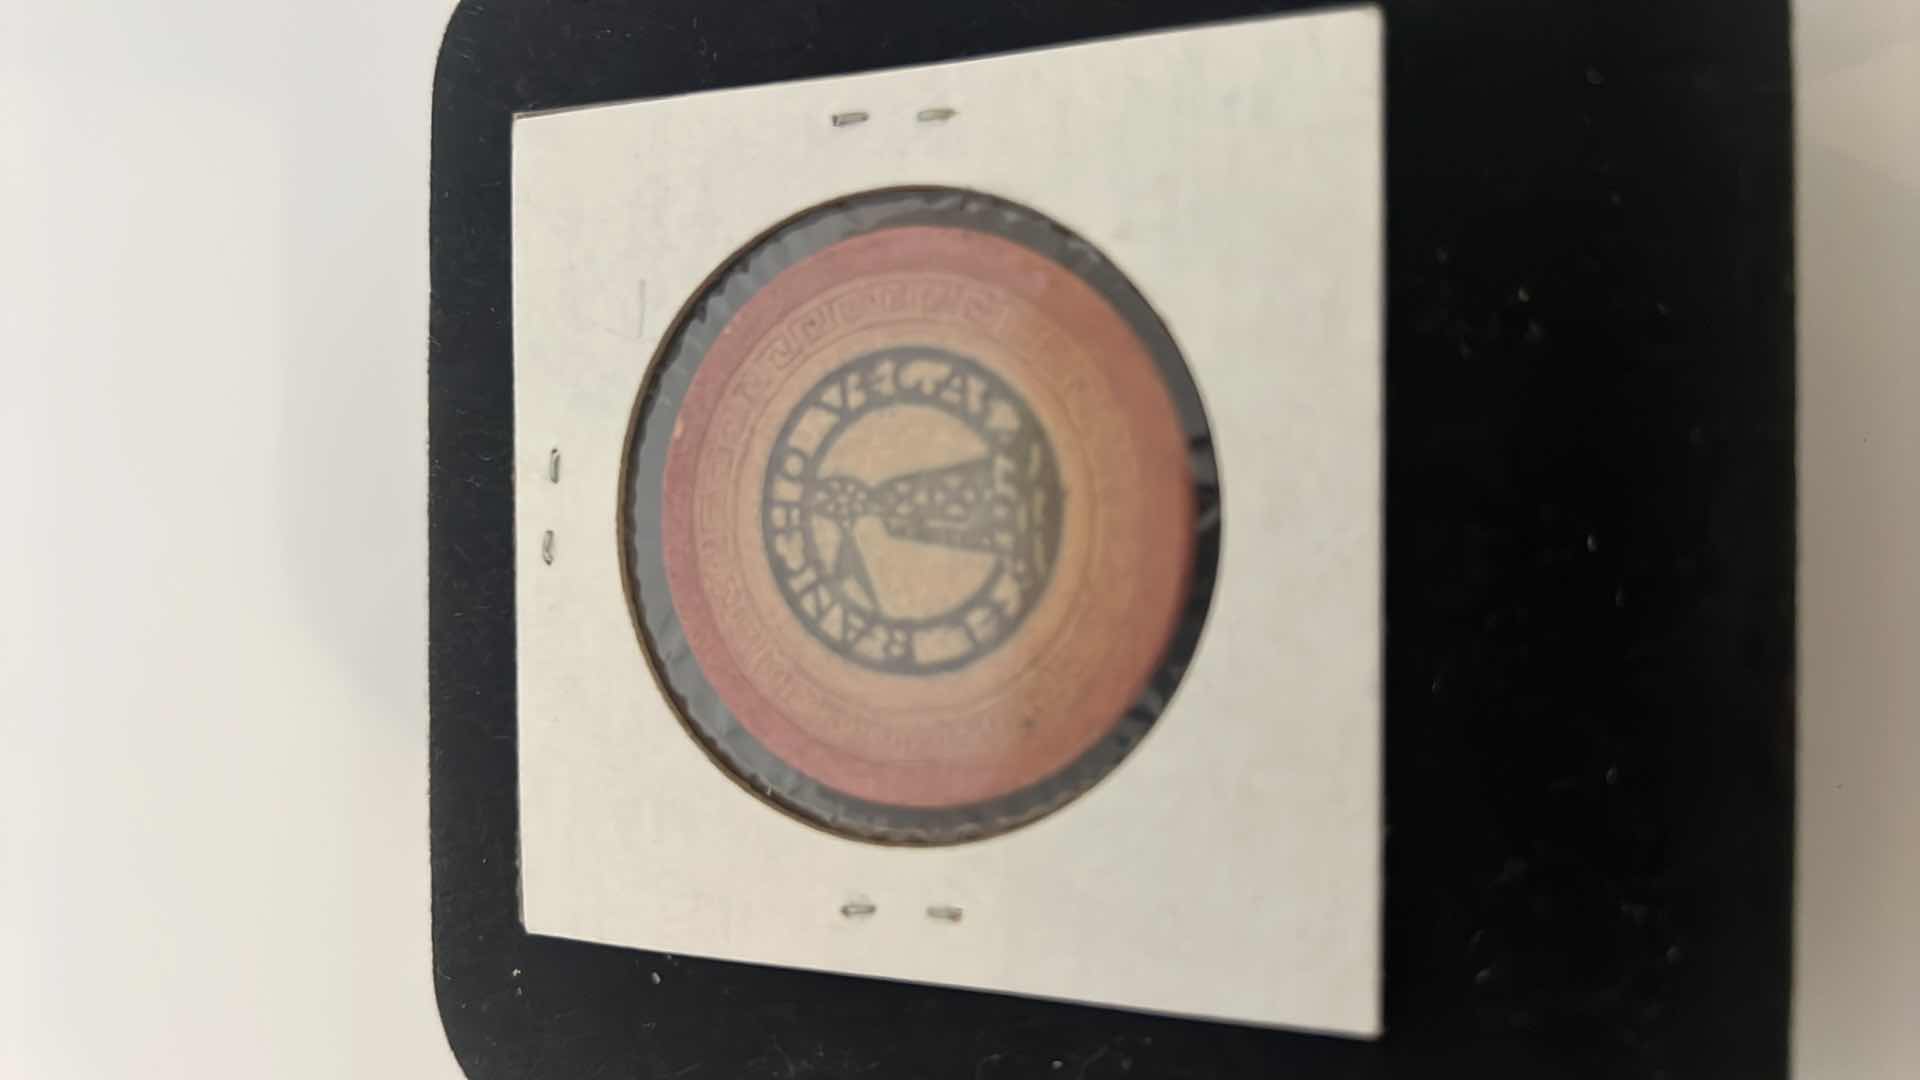 Photo 3 of EXTREMELY RARE 1947 $25 EL RANCHO “DIE CUT INLAY” CASINO CHIP